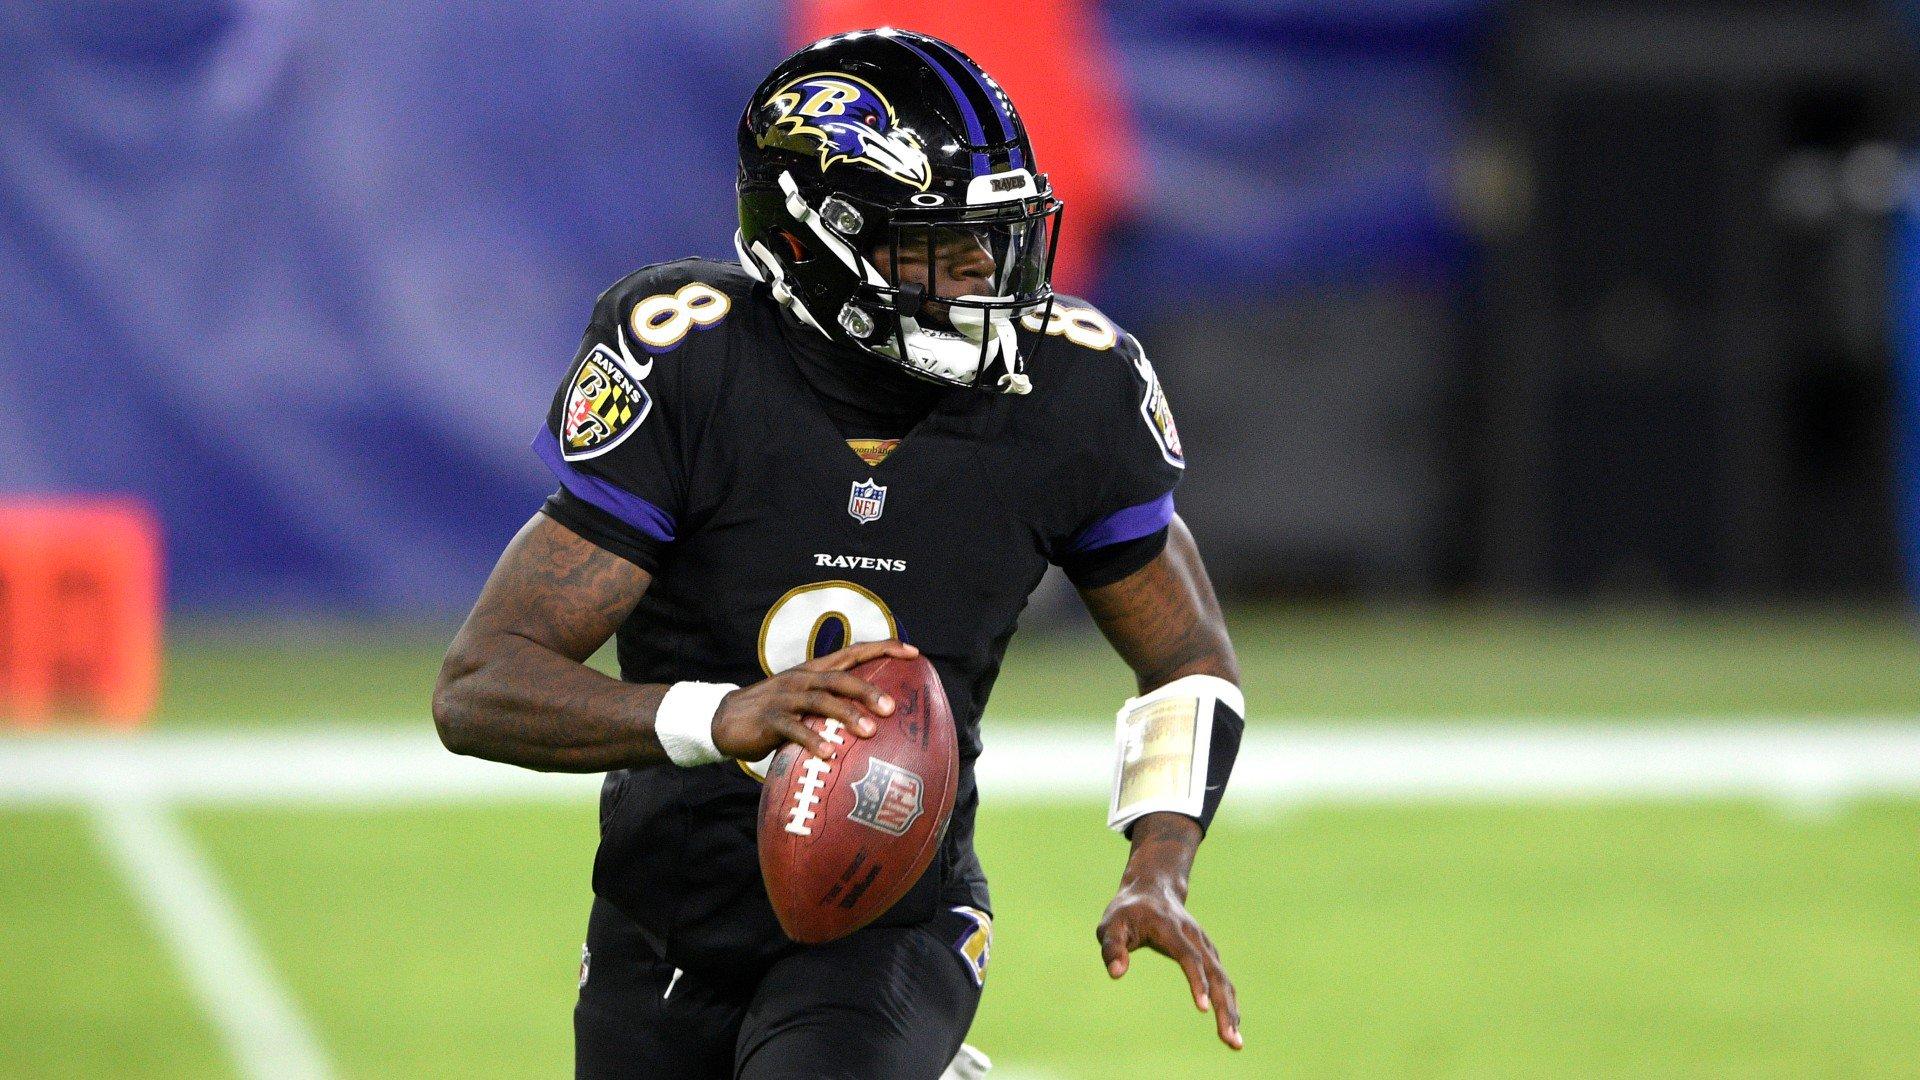 Baltimore Ravens Betting Preview: Jackson, Ravens Have High Floor, But Playoff Success Likely Elusive Again